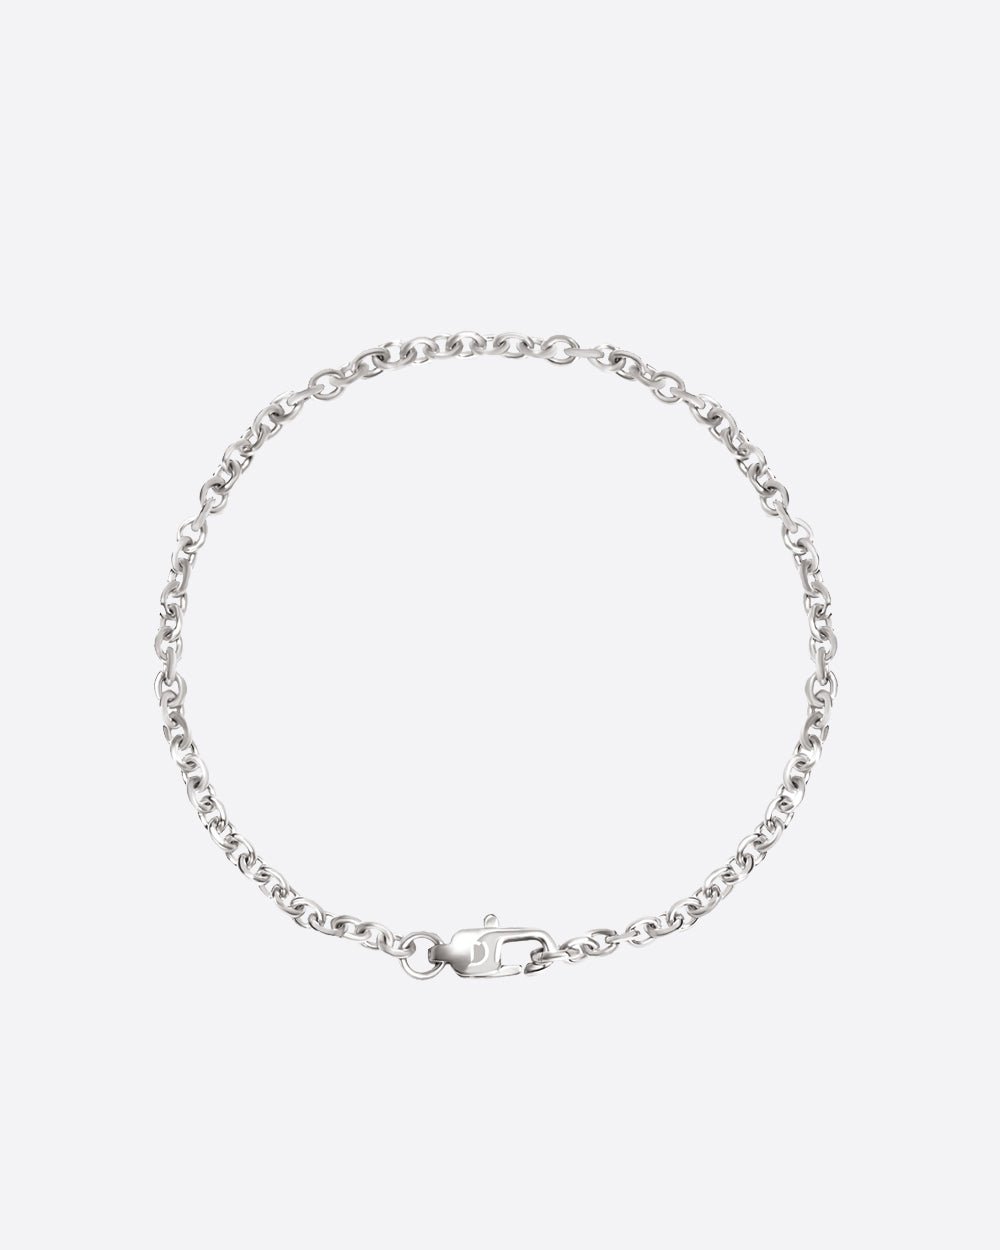 CABLE LINK BRACELET. - 3MM WHITE GOLD - Drippy Amsterdam